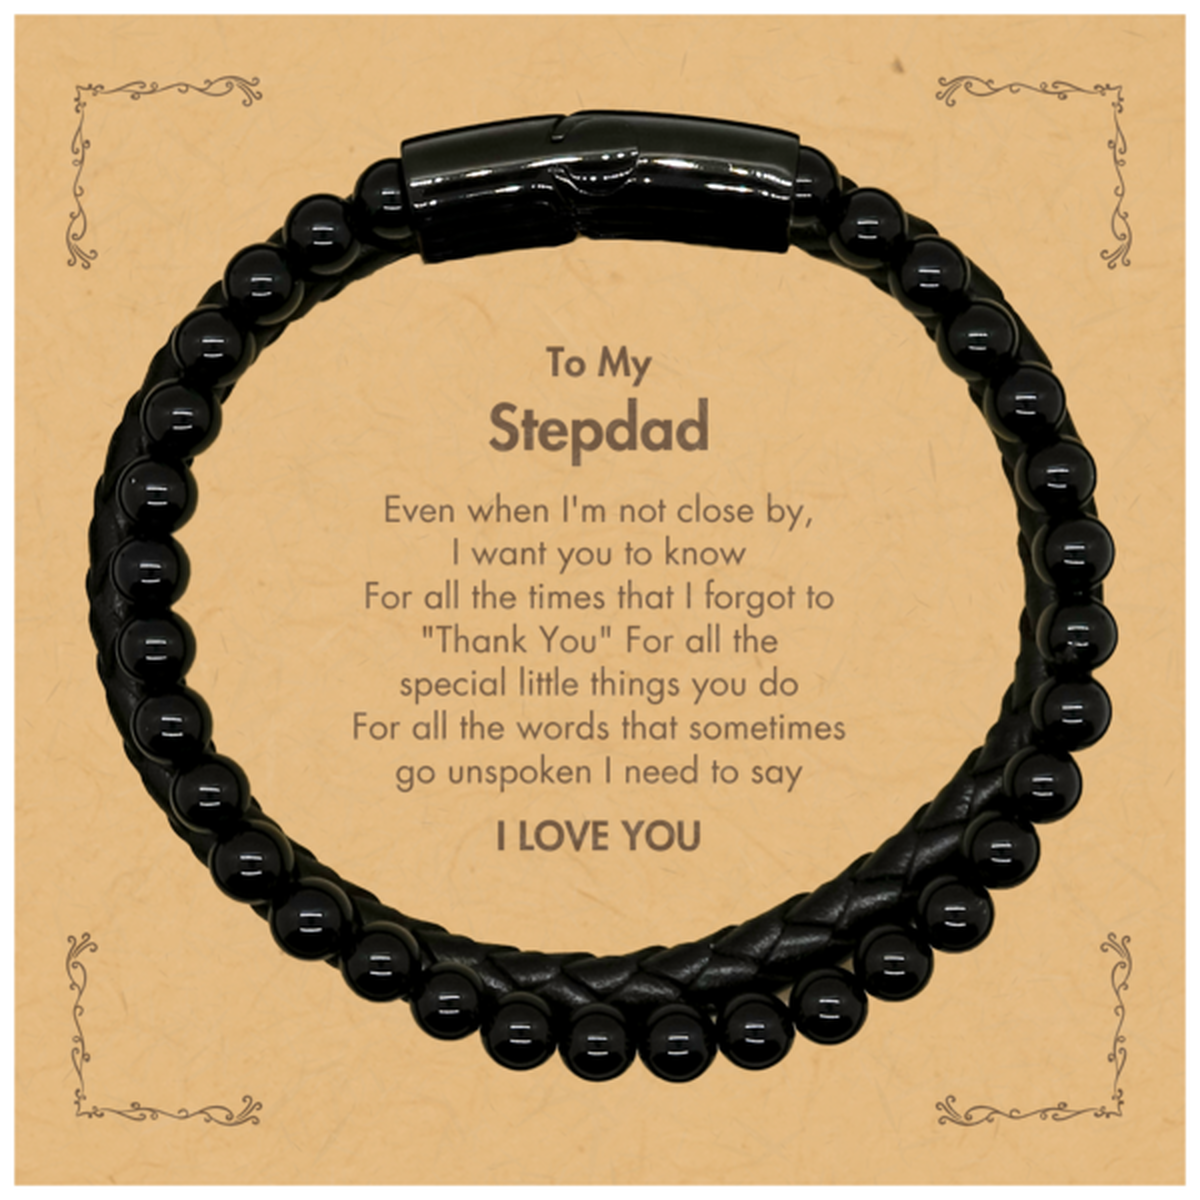 Thank You Gifts for Stepdad, Keepsake Stone Leather Bracelets Gifts for Stepdad Birthday Mother's day Father's Day Stepdad For all the words That sometimes go unspoken I need to say I LOVE YOU